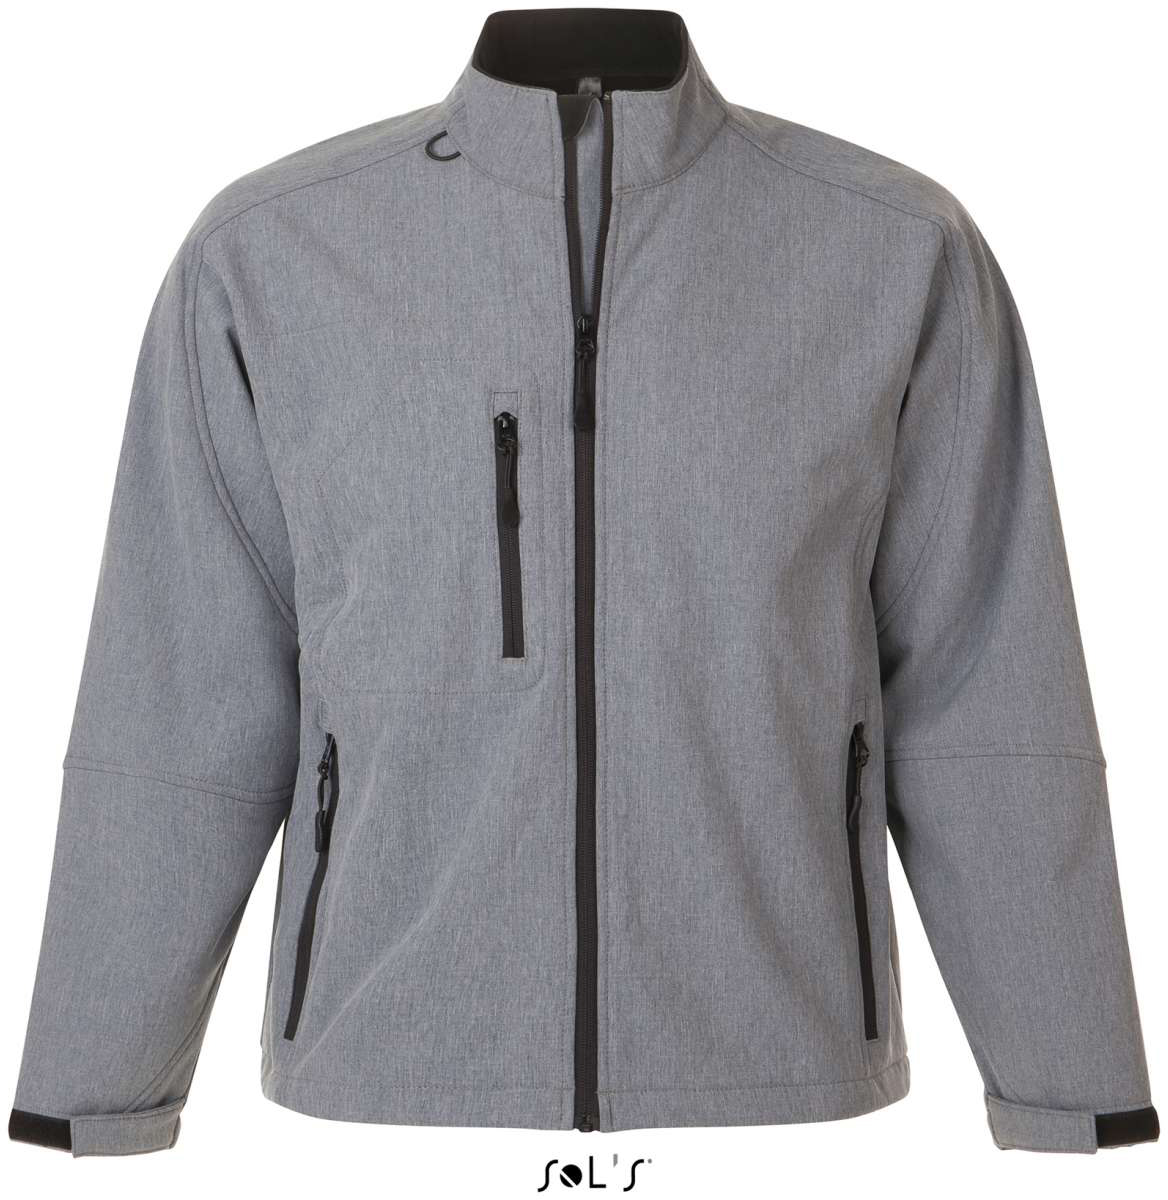 Sol's Relax - Men's Softshell Zipped Jacket - Sol's Relax - Men's Softshell Zipped Jacket - Sport Grey